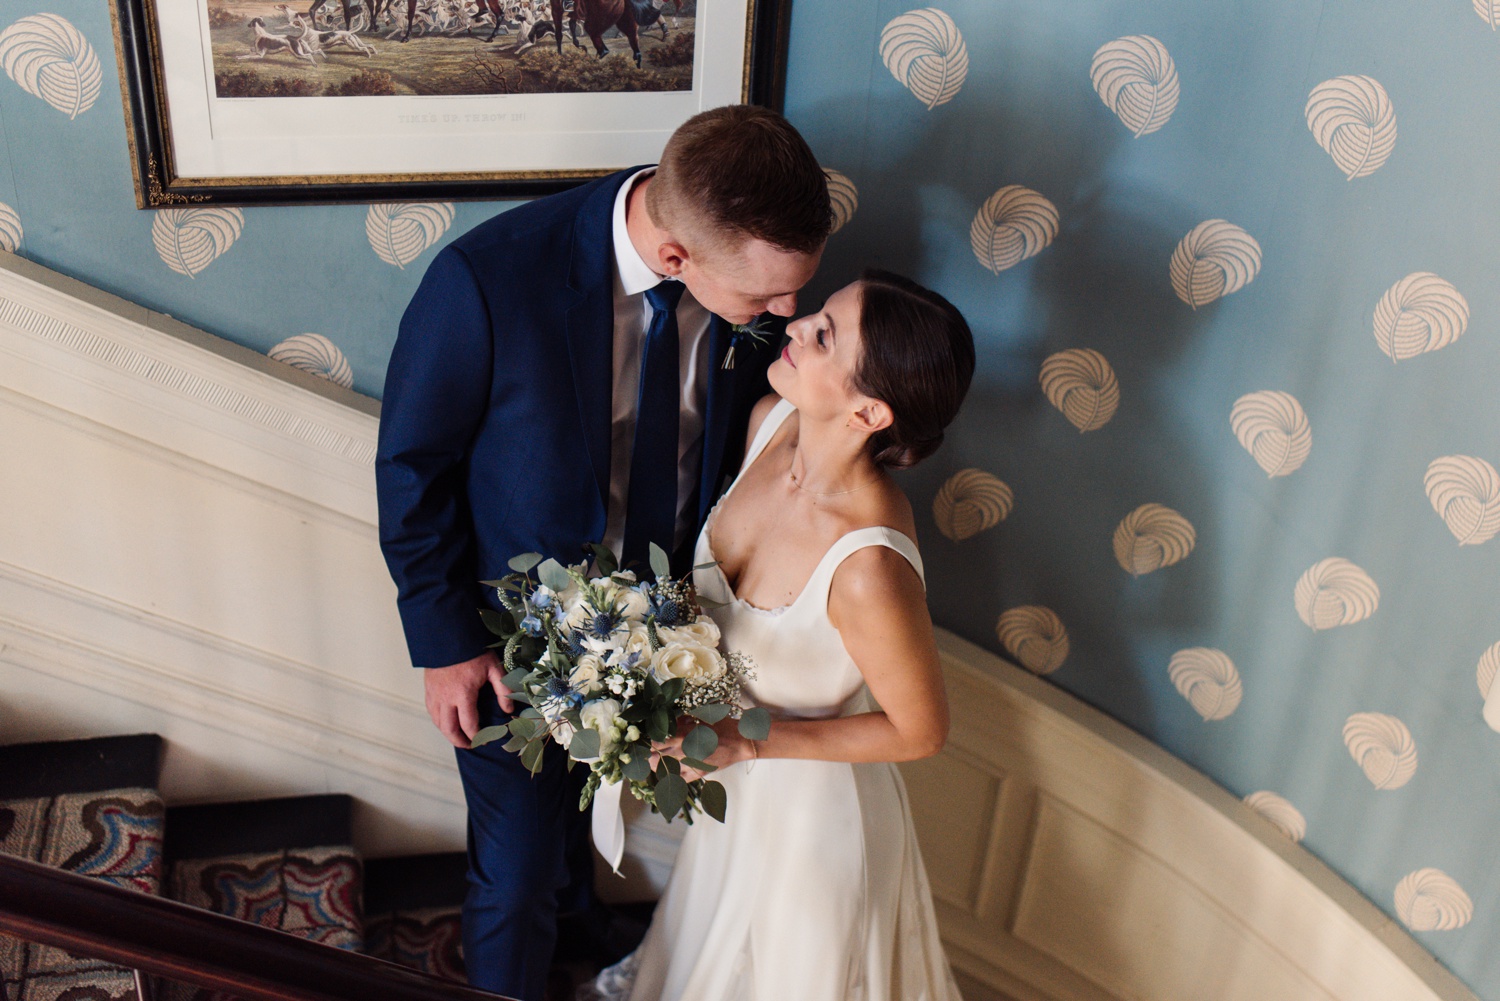 Bridal portraits at The Brick House at Shelburne Museum with classic New England style